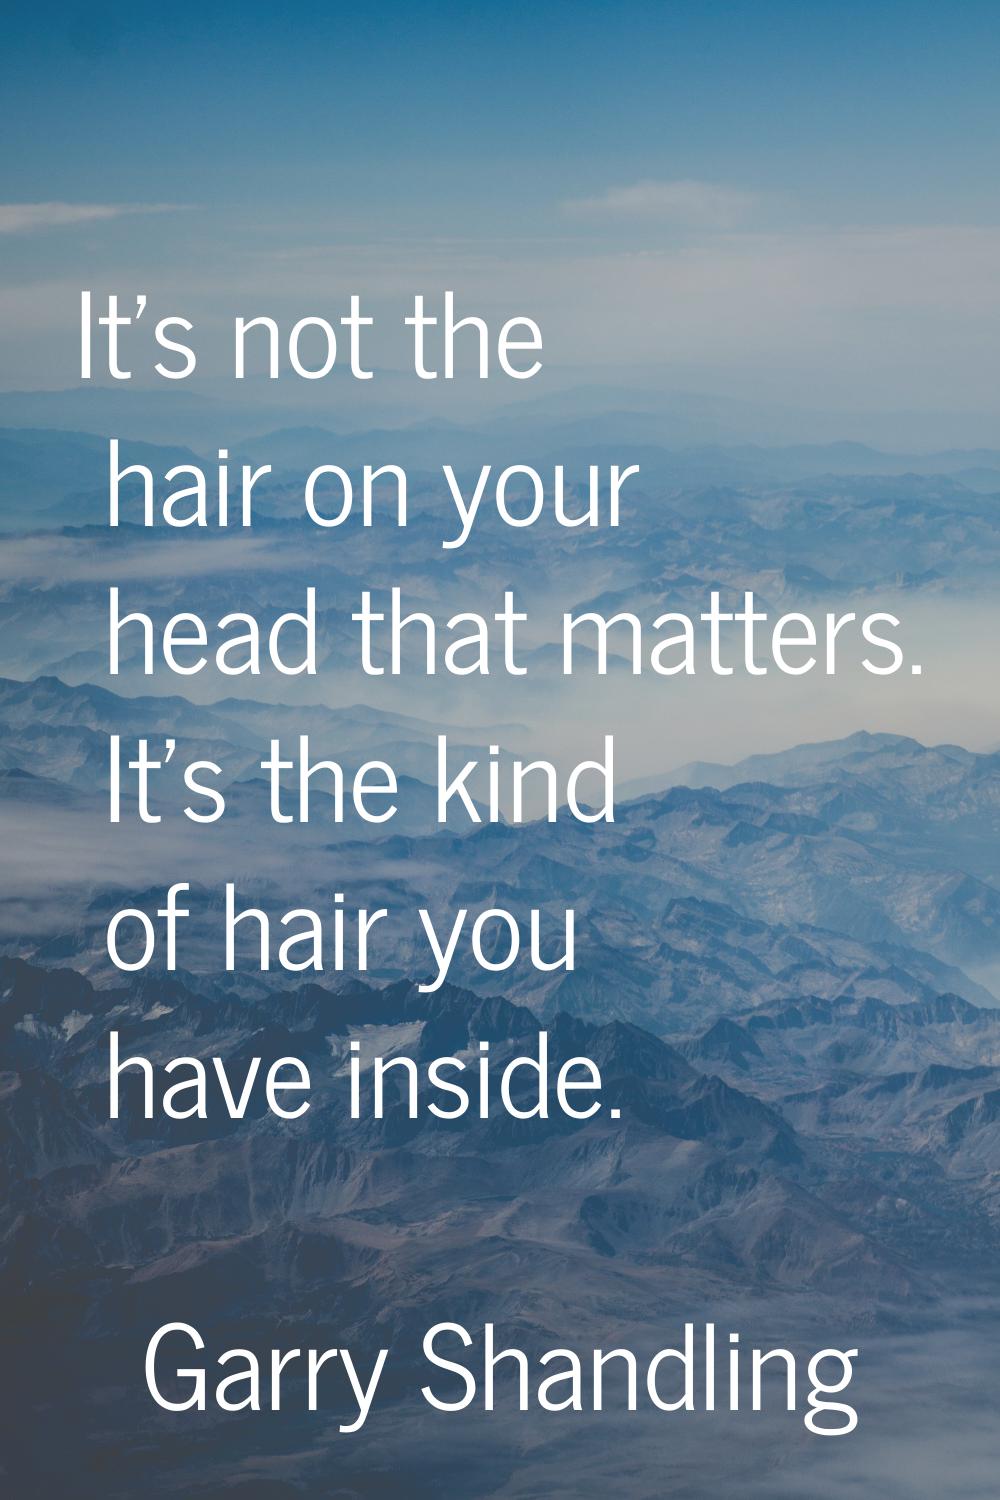 It's not the hair on your head that matters. It's the kind of hair you have inside.